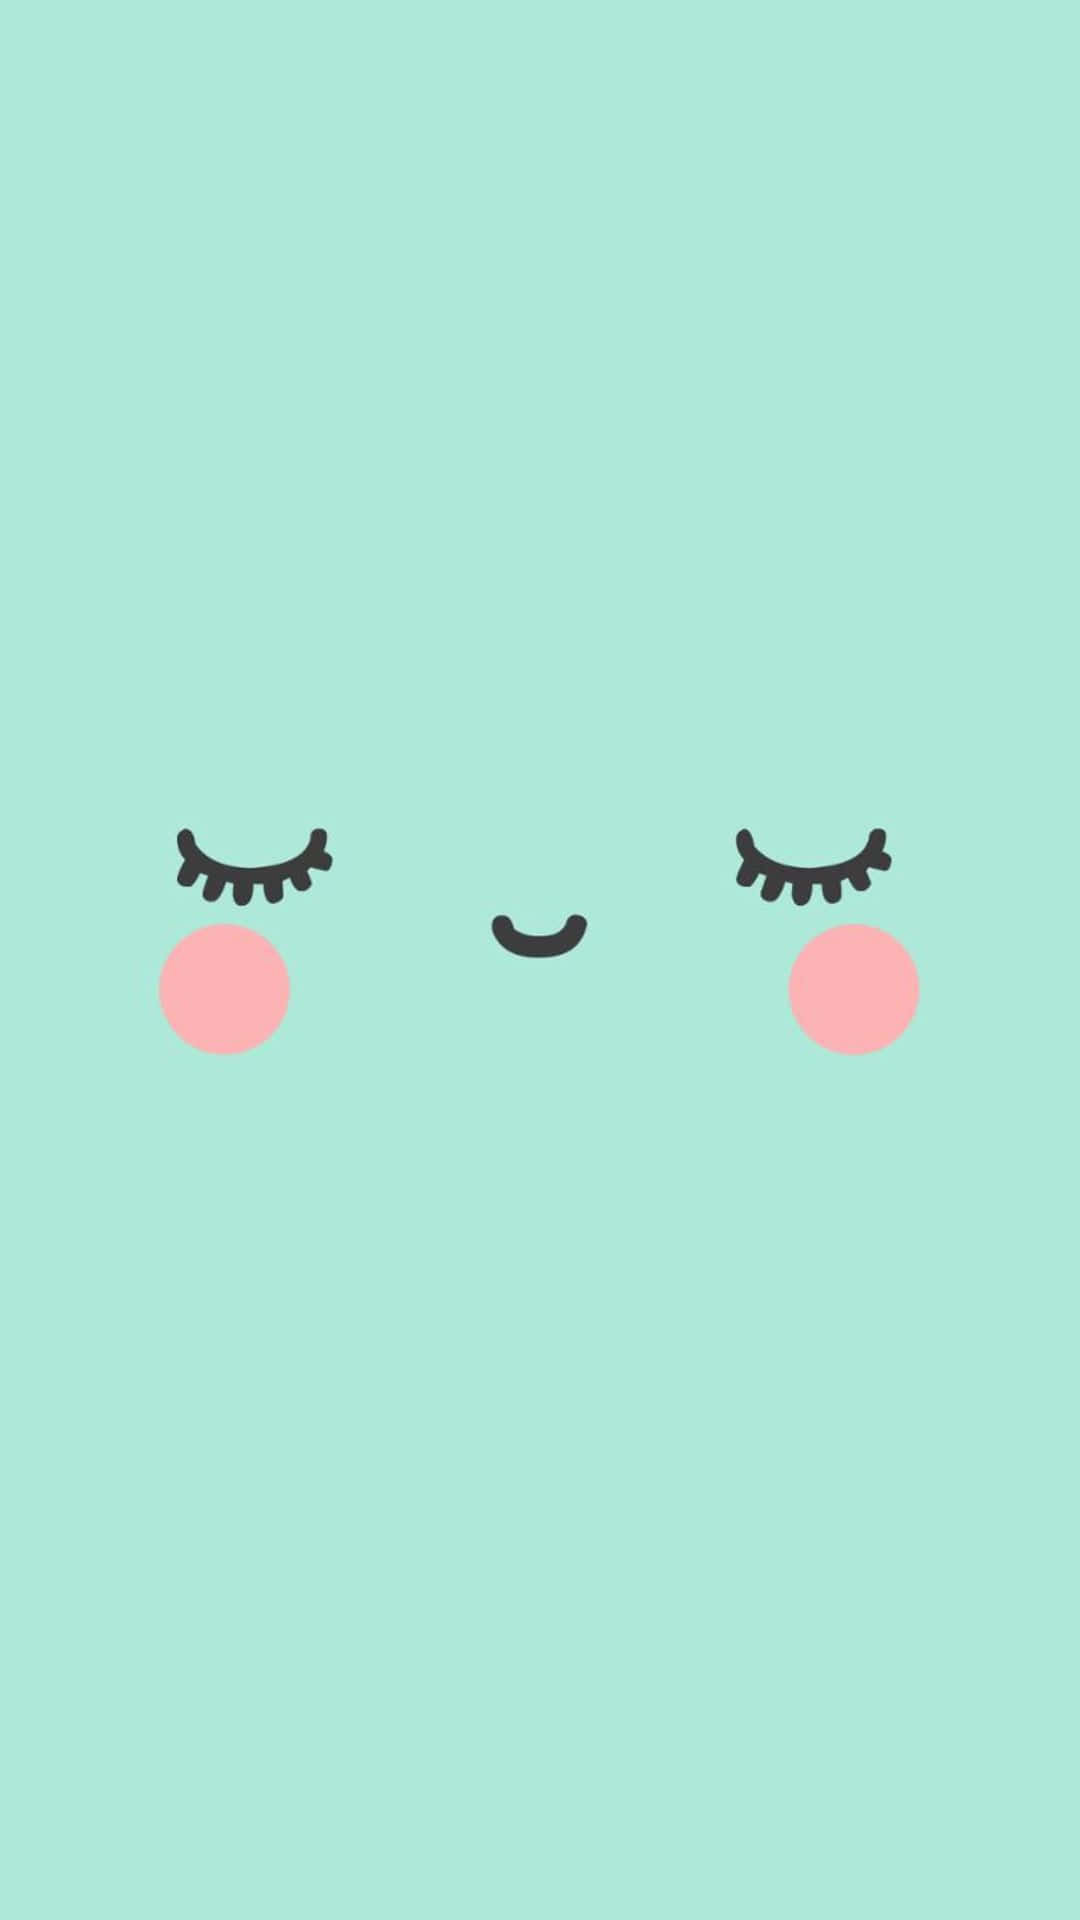 Cute Kawaii Emoticons on Pink Background Wallpaper